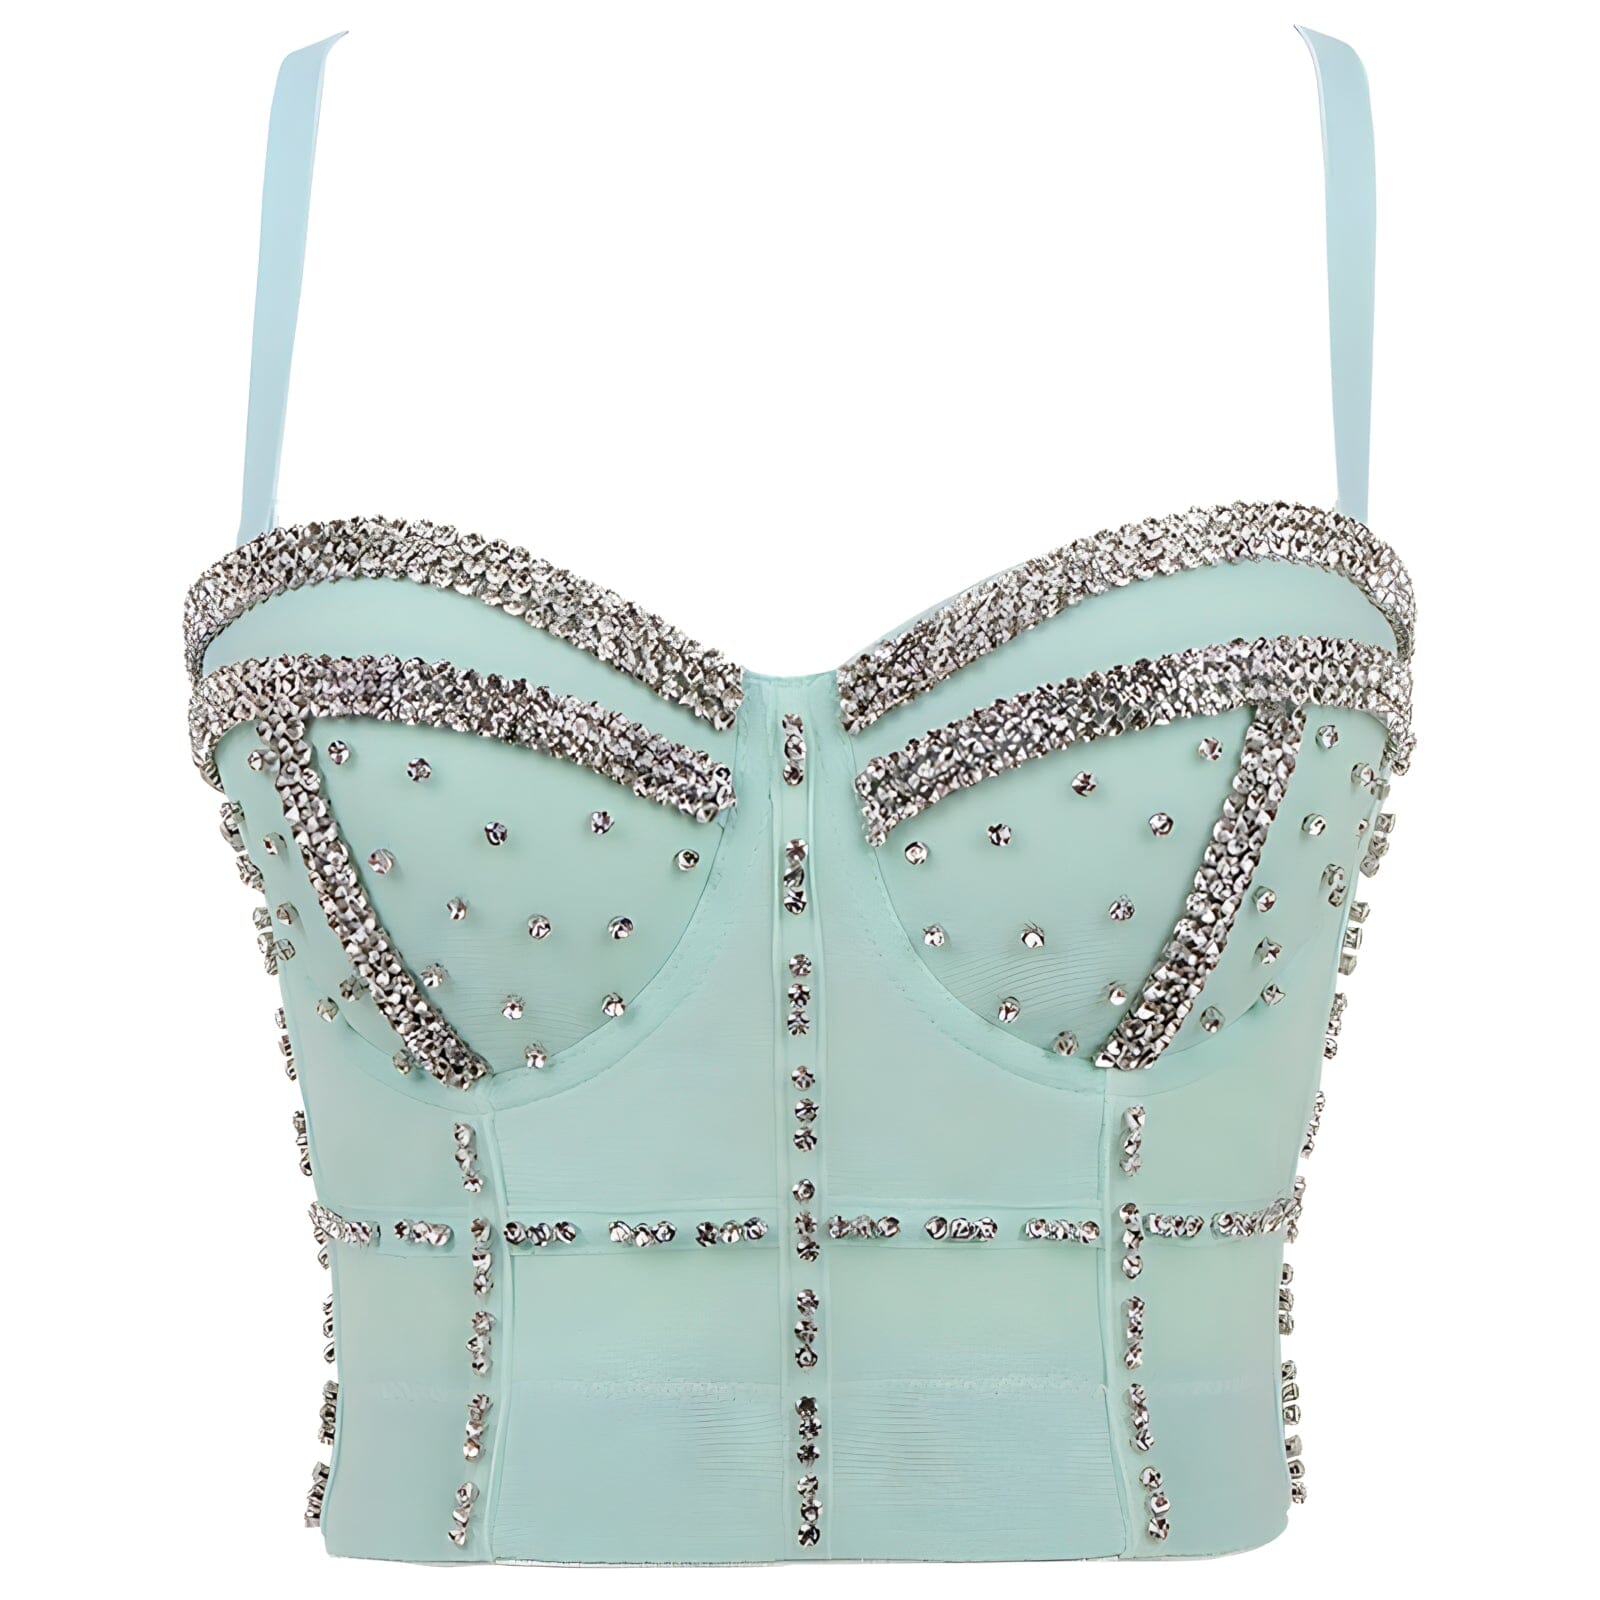 The Cardi Crop Top Rhinestone Camisole - Multiple Colors 0 SA Styles Mint S 